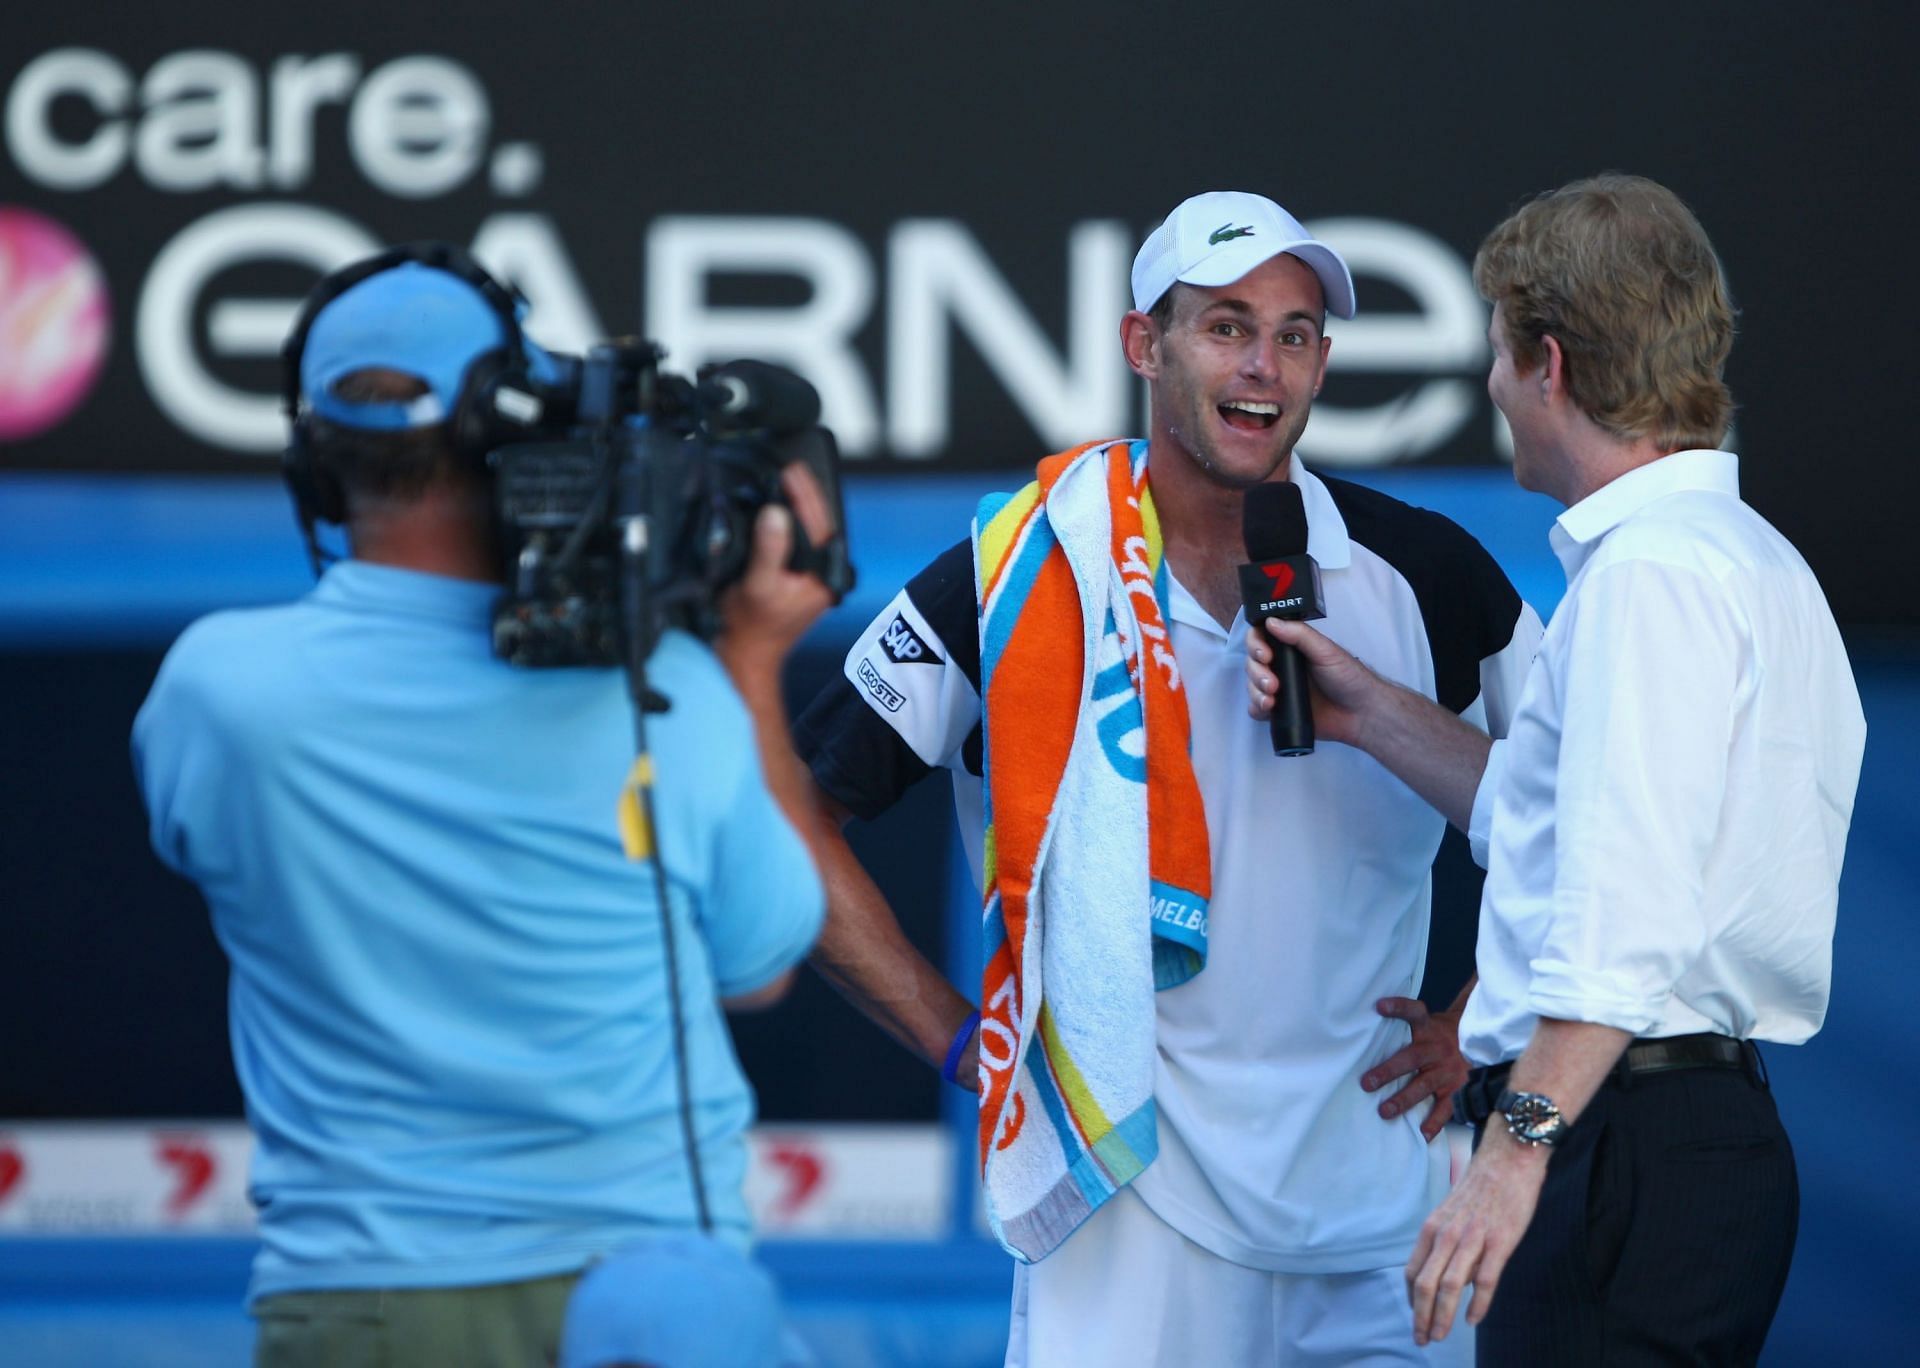 Andy Roddick pictured at the 2009 Australian Open